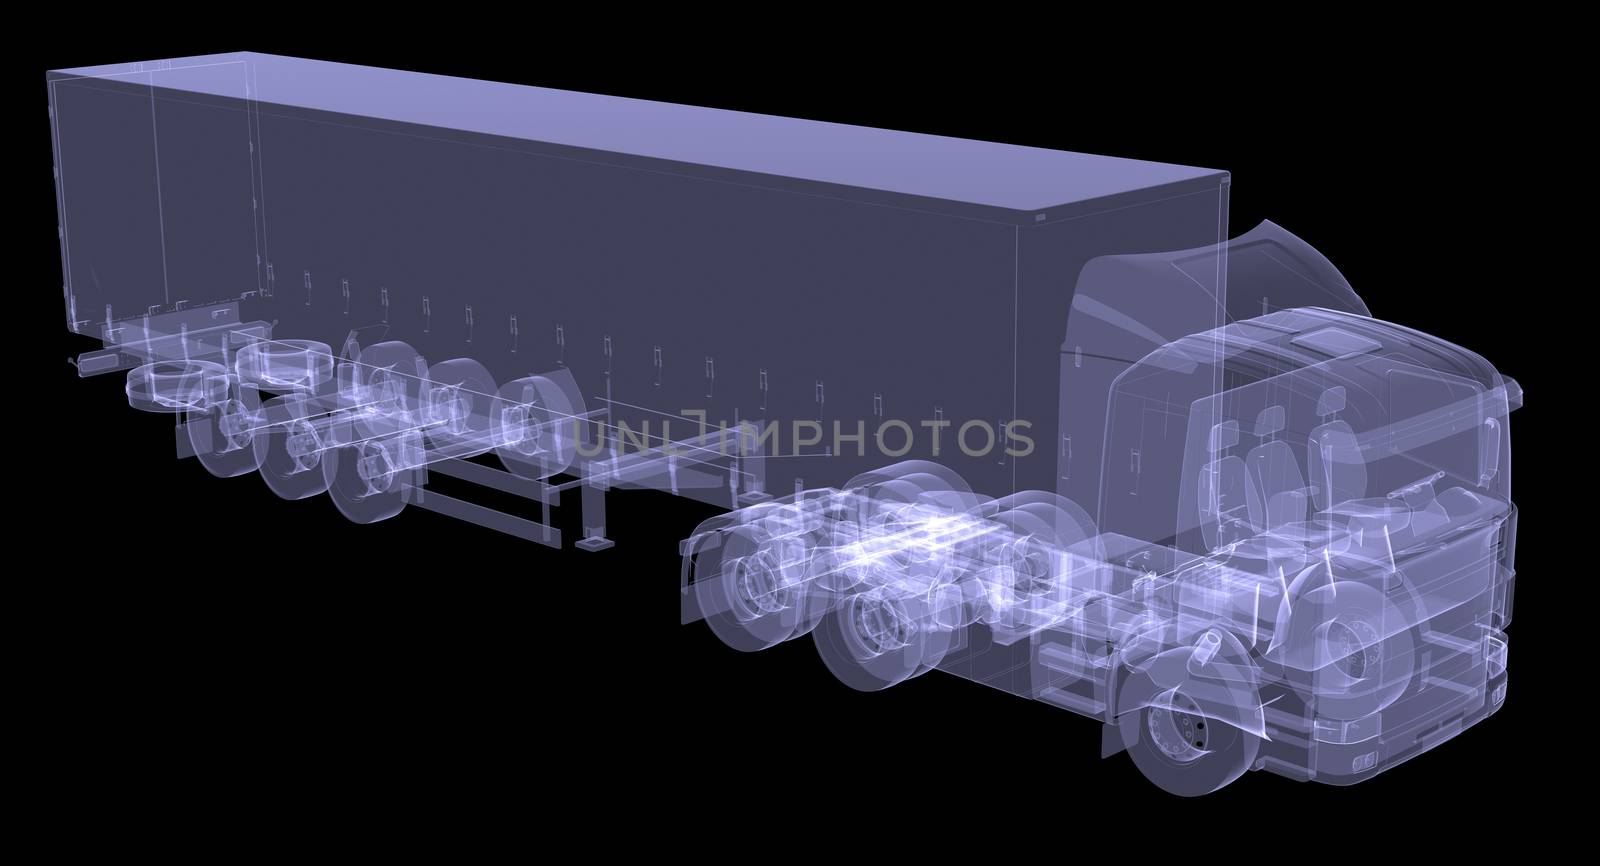 Big truck tractor. Isolated render of an X-ray